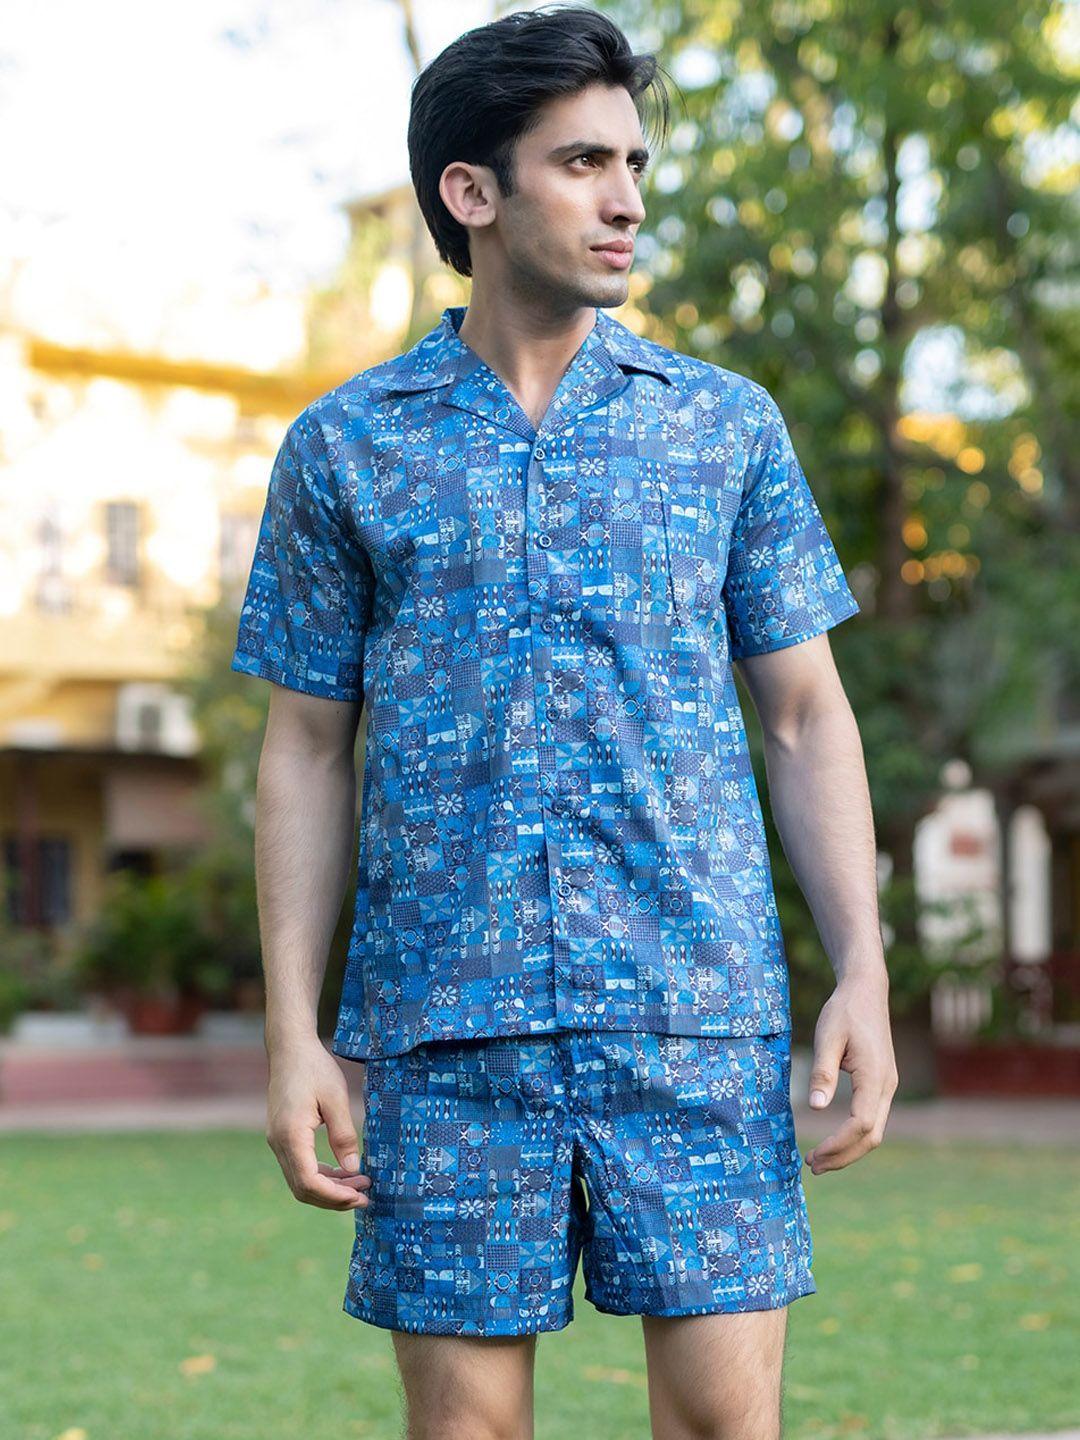 tistabene printed shirt and shorts night suit